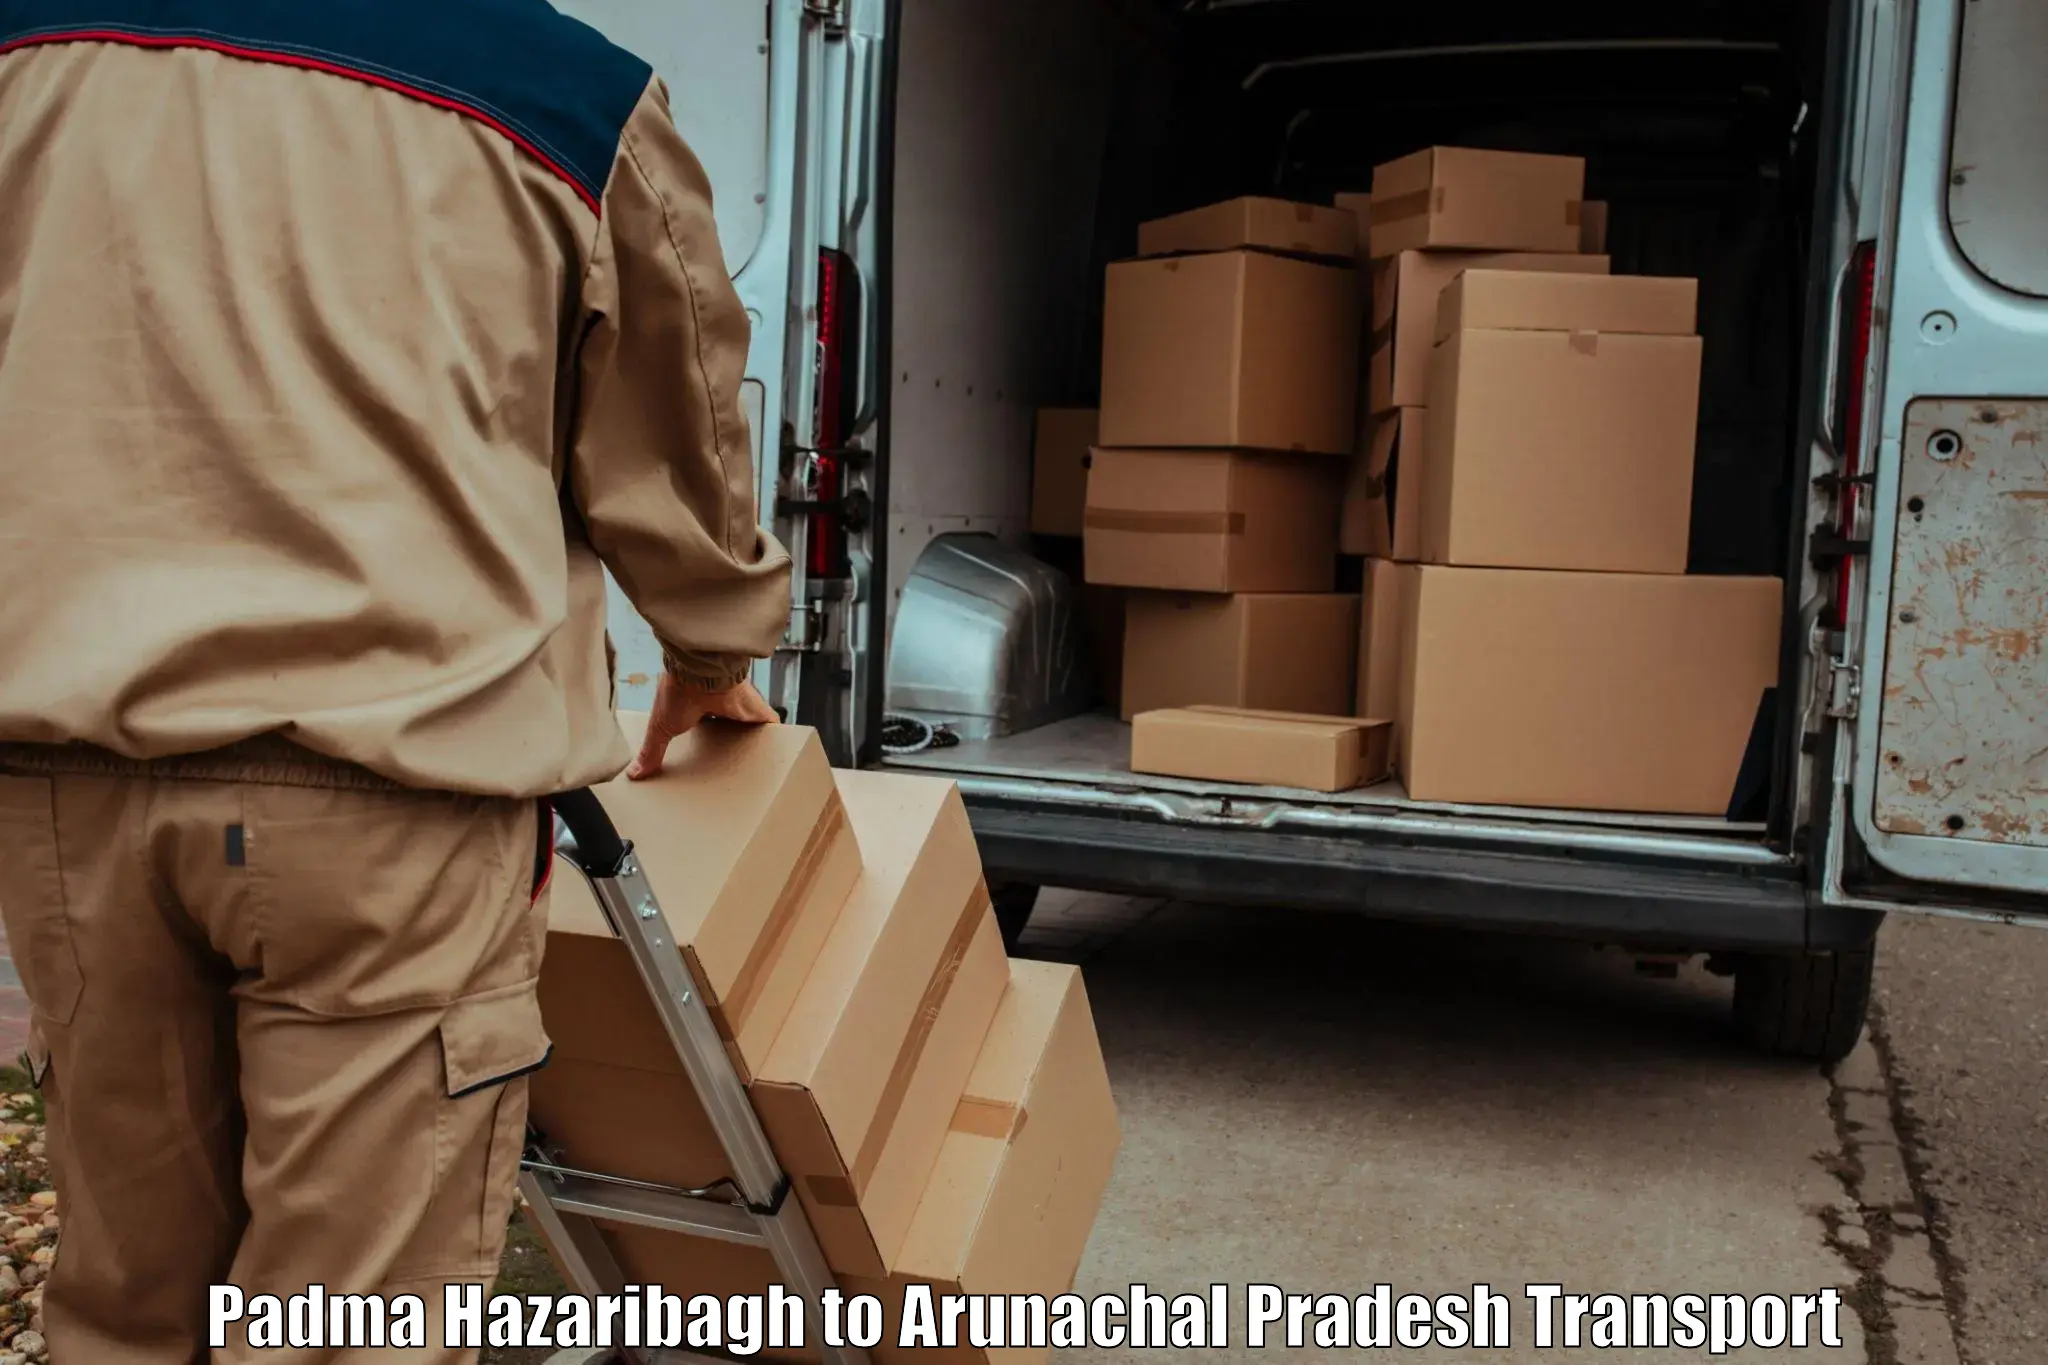 Air freight transport services Padma Hazaribagh to Likabali